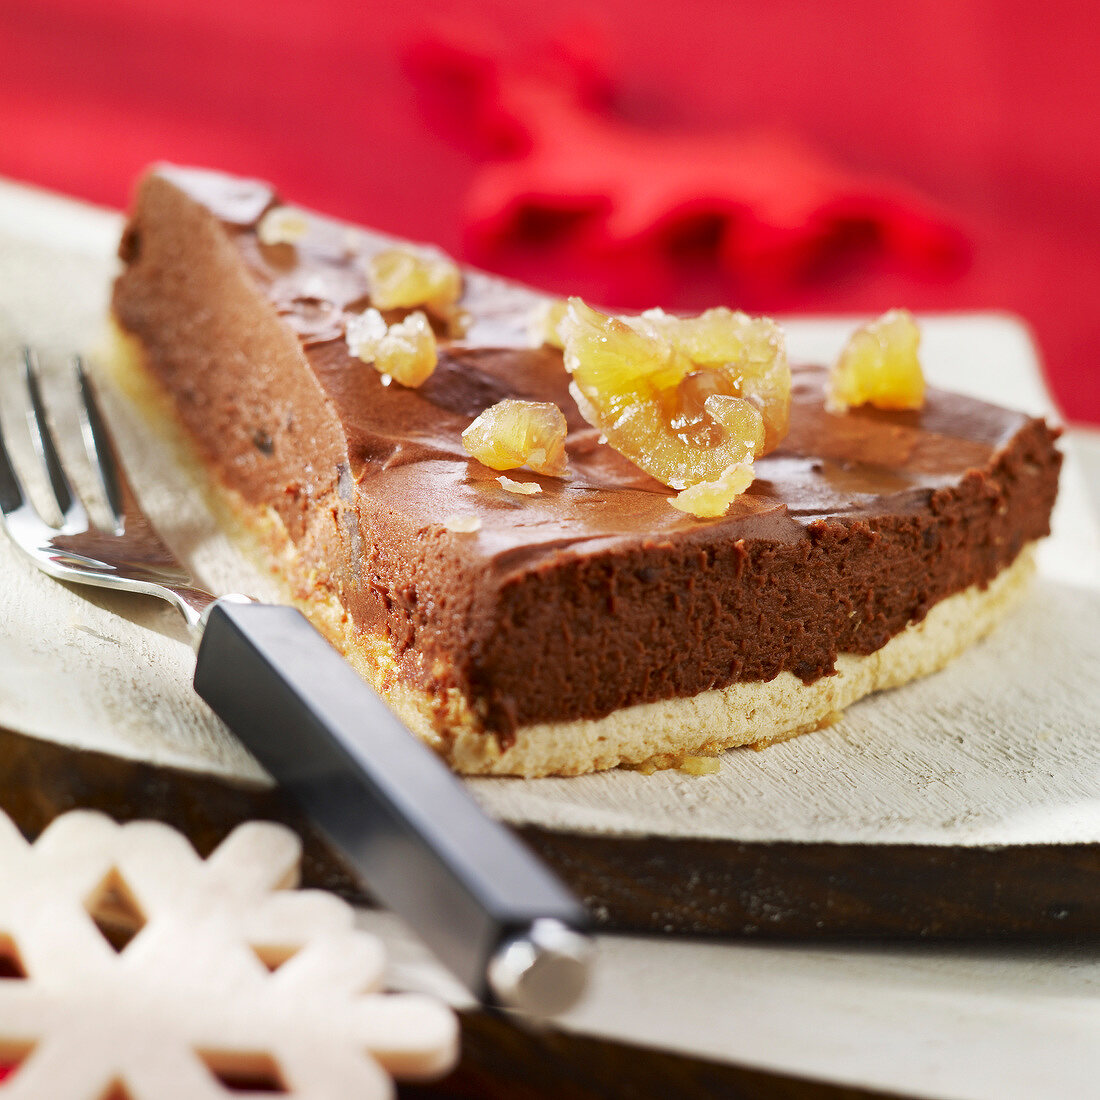 Chocolate and candied chestnut tart